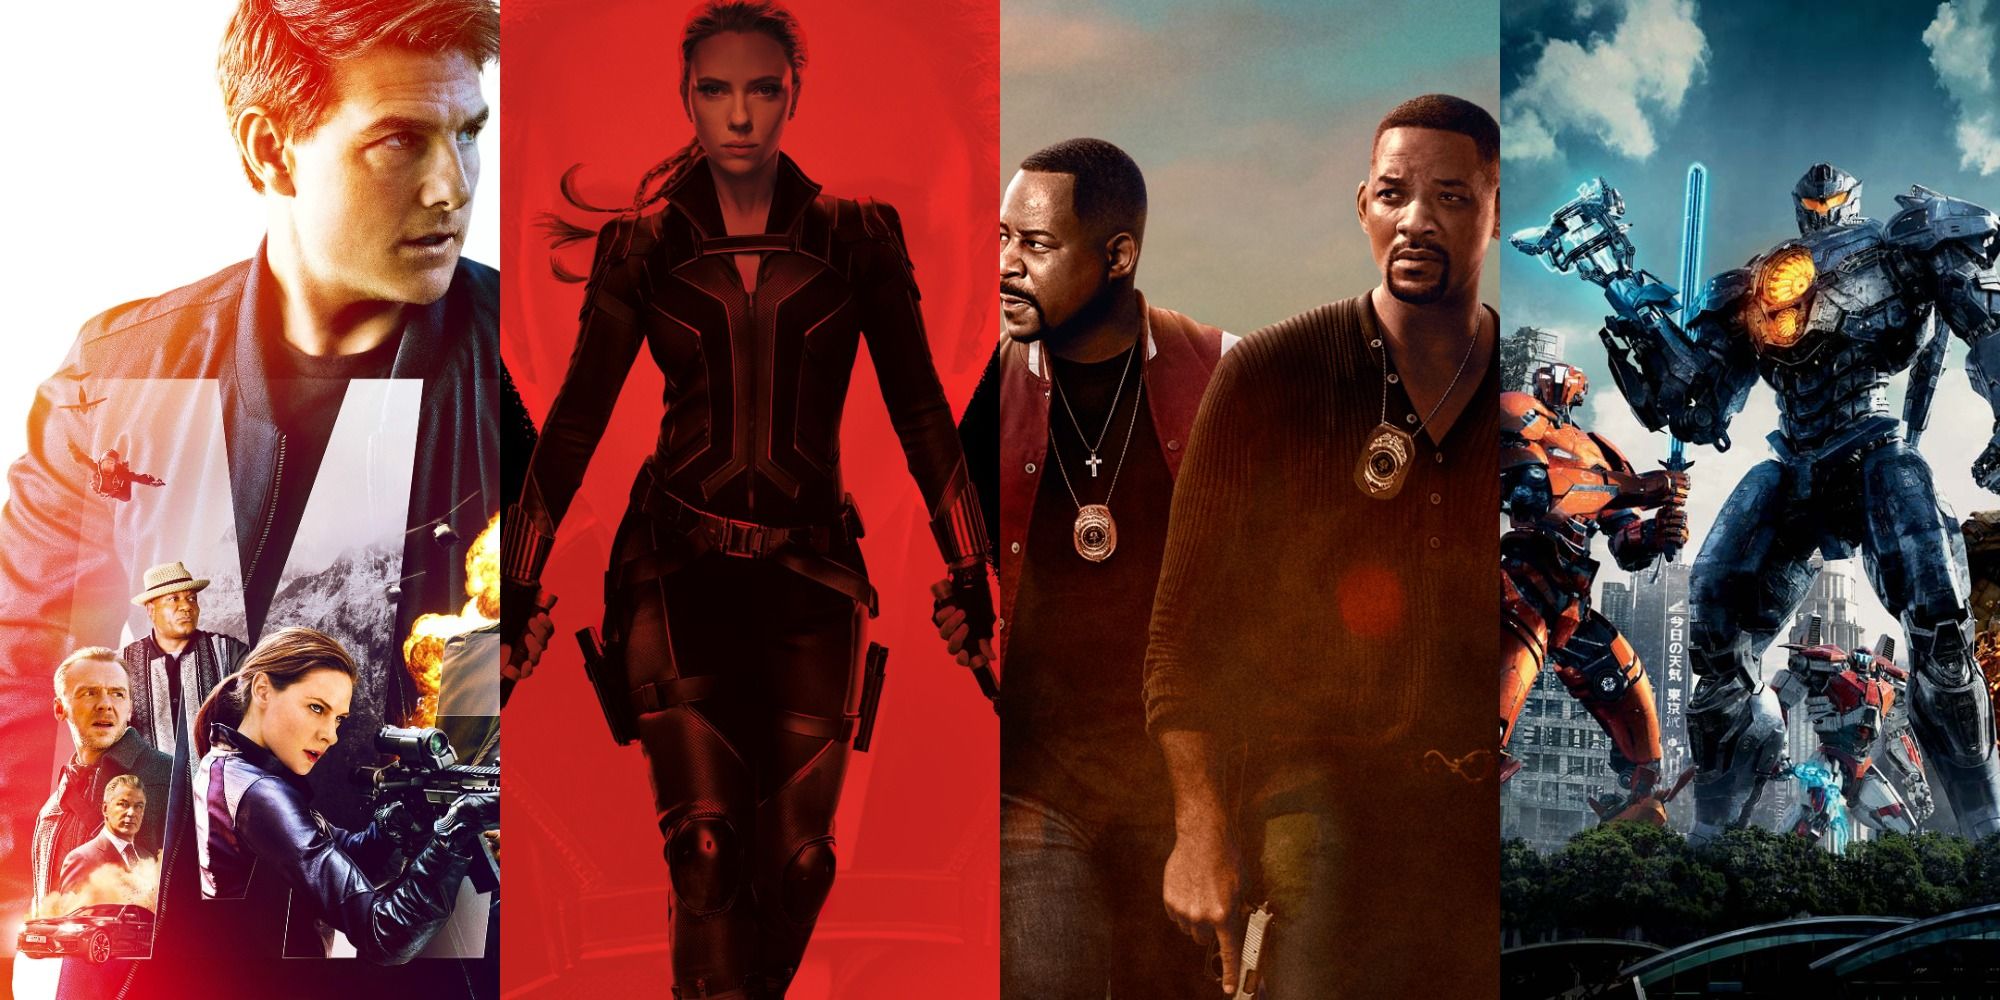 combined images of Mission Impossible - Fallout, Black Widow, Pacific Rim Uprising, Bad Boys 3